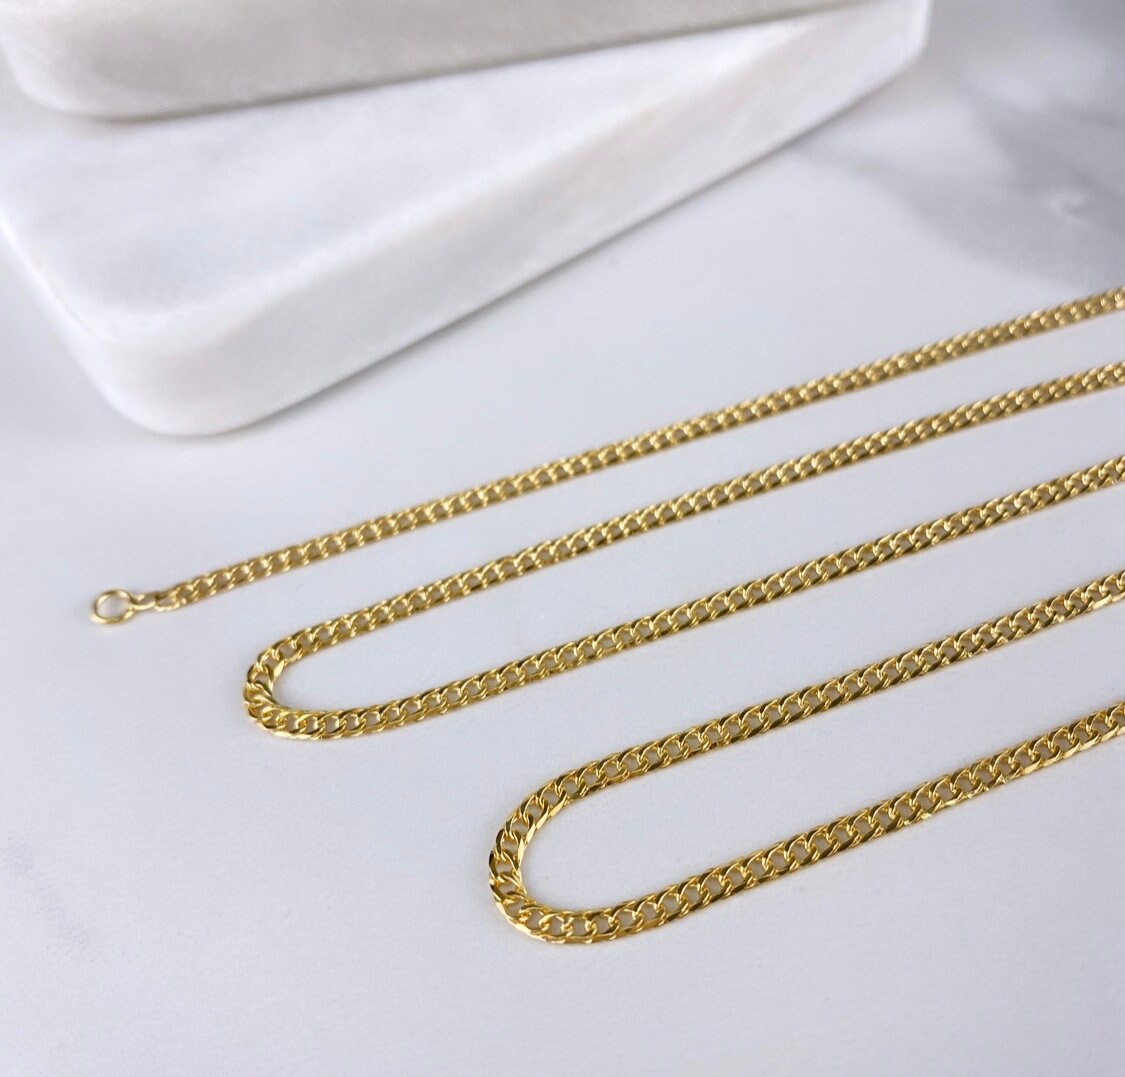 18k Gold Filled 2.2mm Thickness Double Cuban Link Chain, Curb Link Necklace, 20", 22"and 24" Wholesale Jewelry Making Supplies